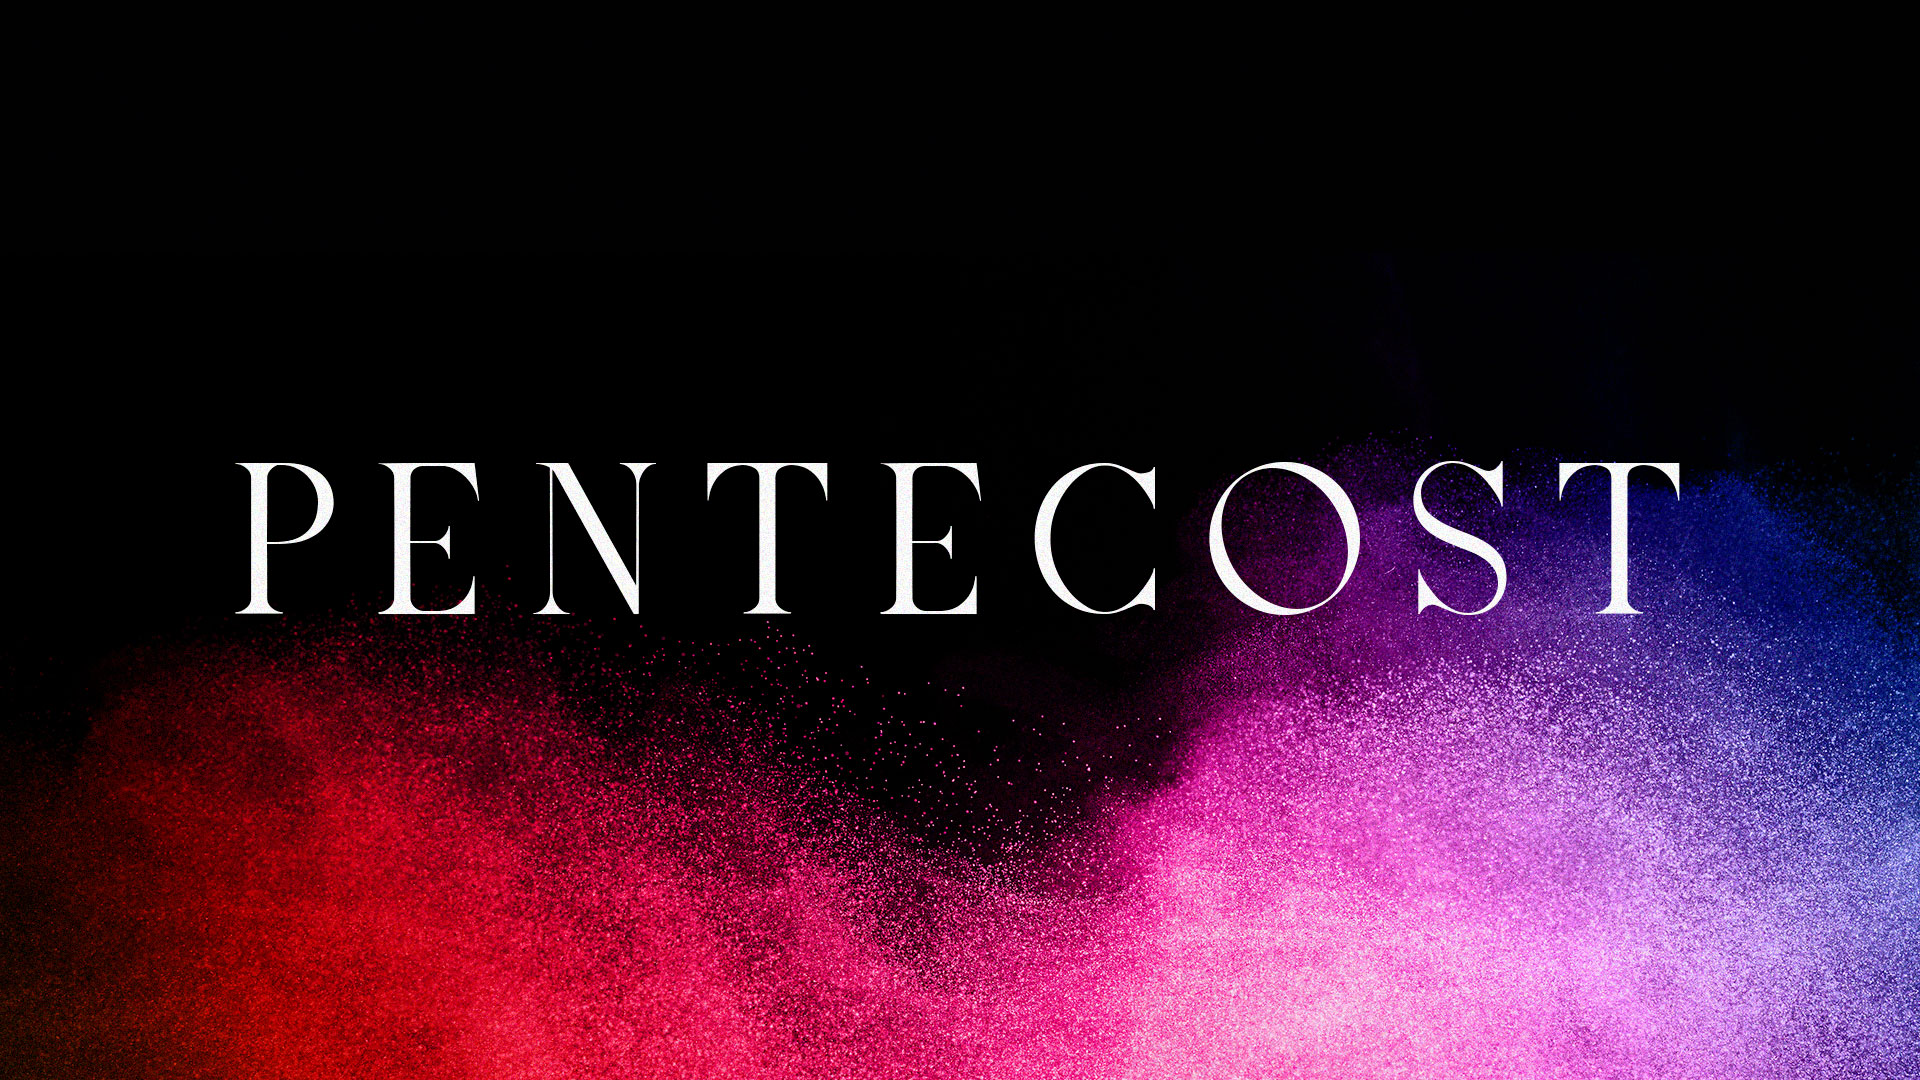 PENTECOST - THE SEASON PREMIER OF GOD’S ONGOING WORK IN THE WORLD